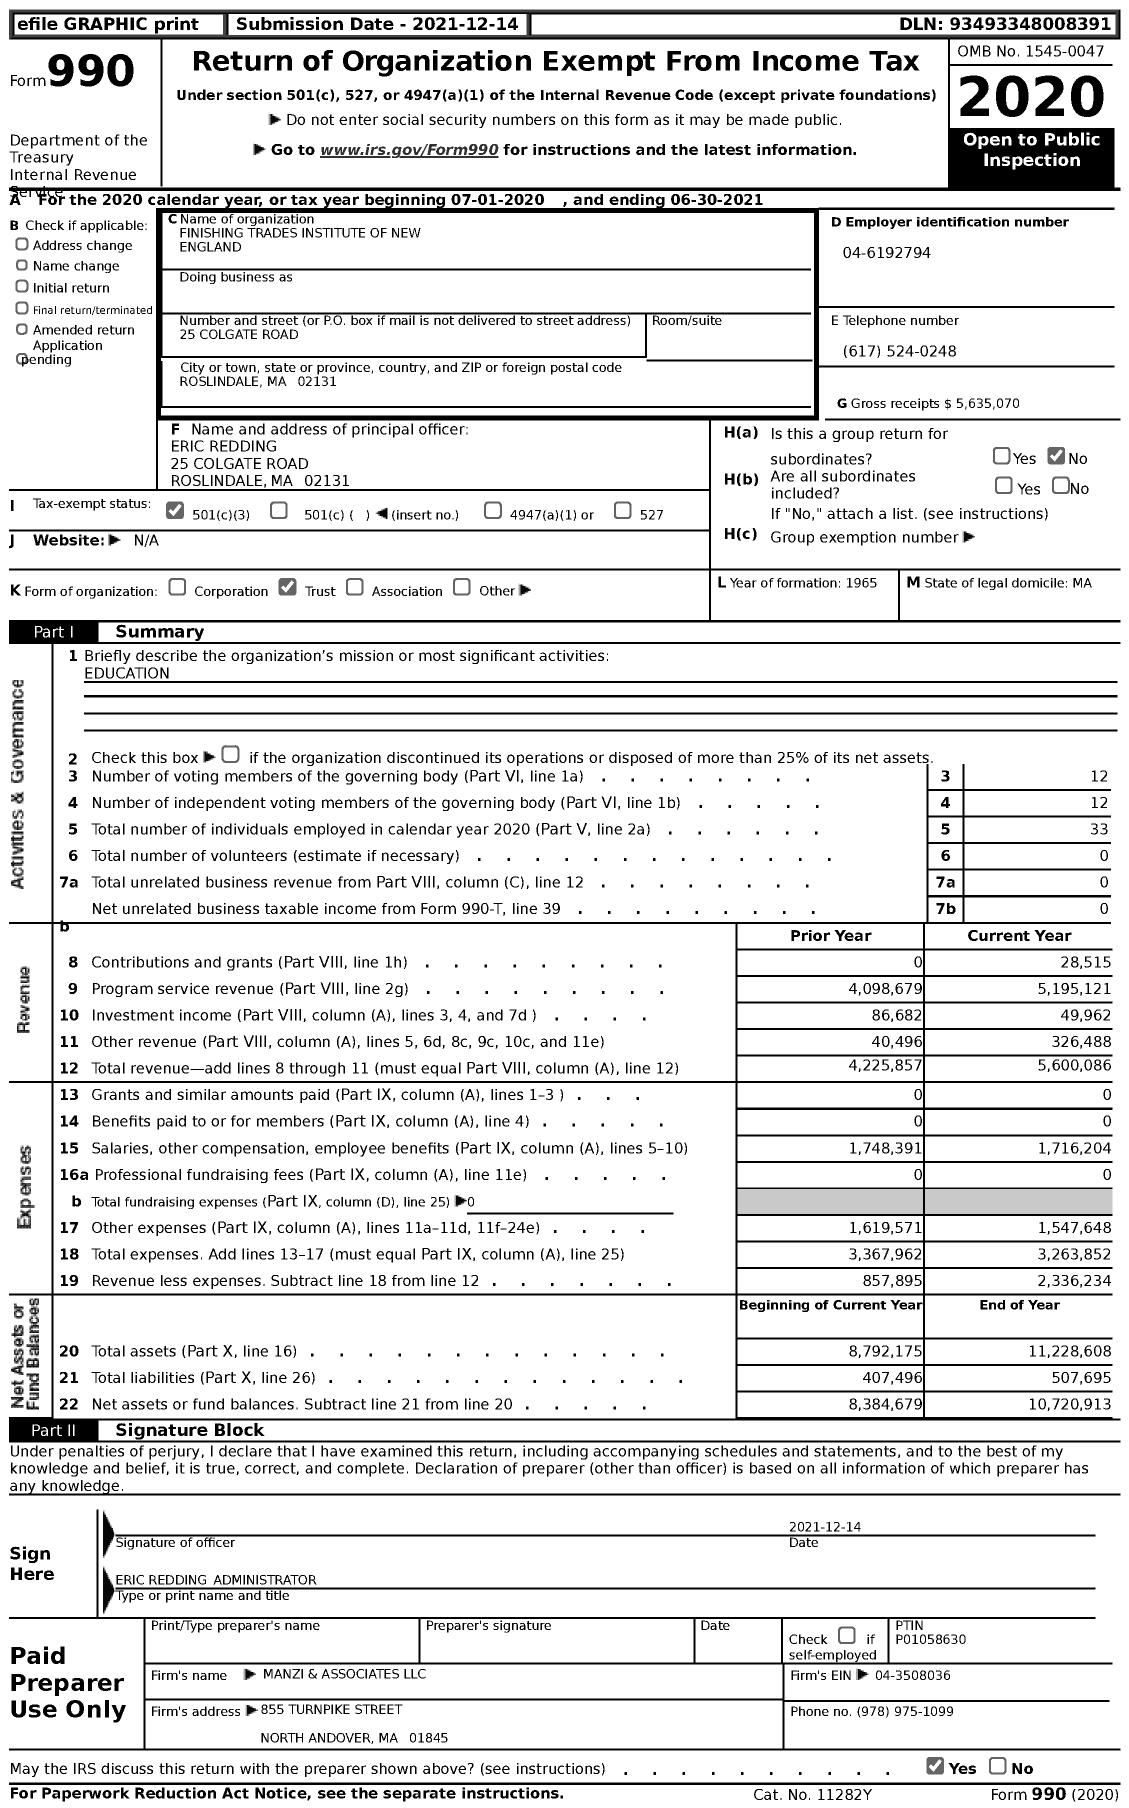 Image of first page of 2020 Form 990 for Finishing Trades Institute of New England